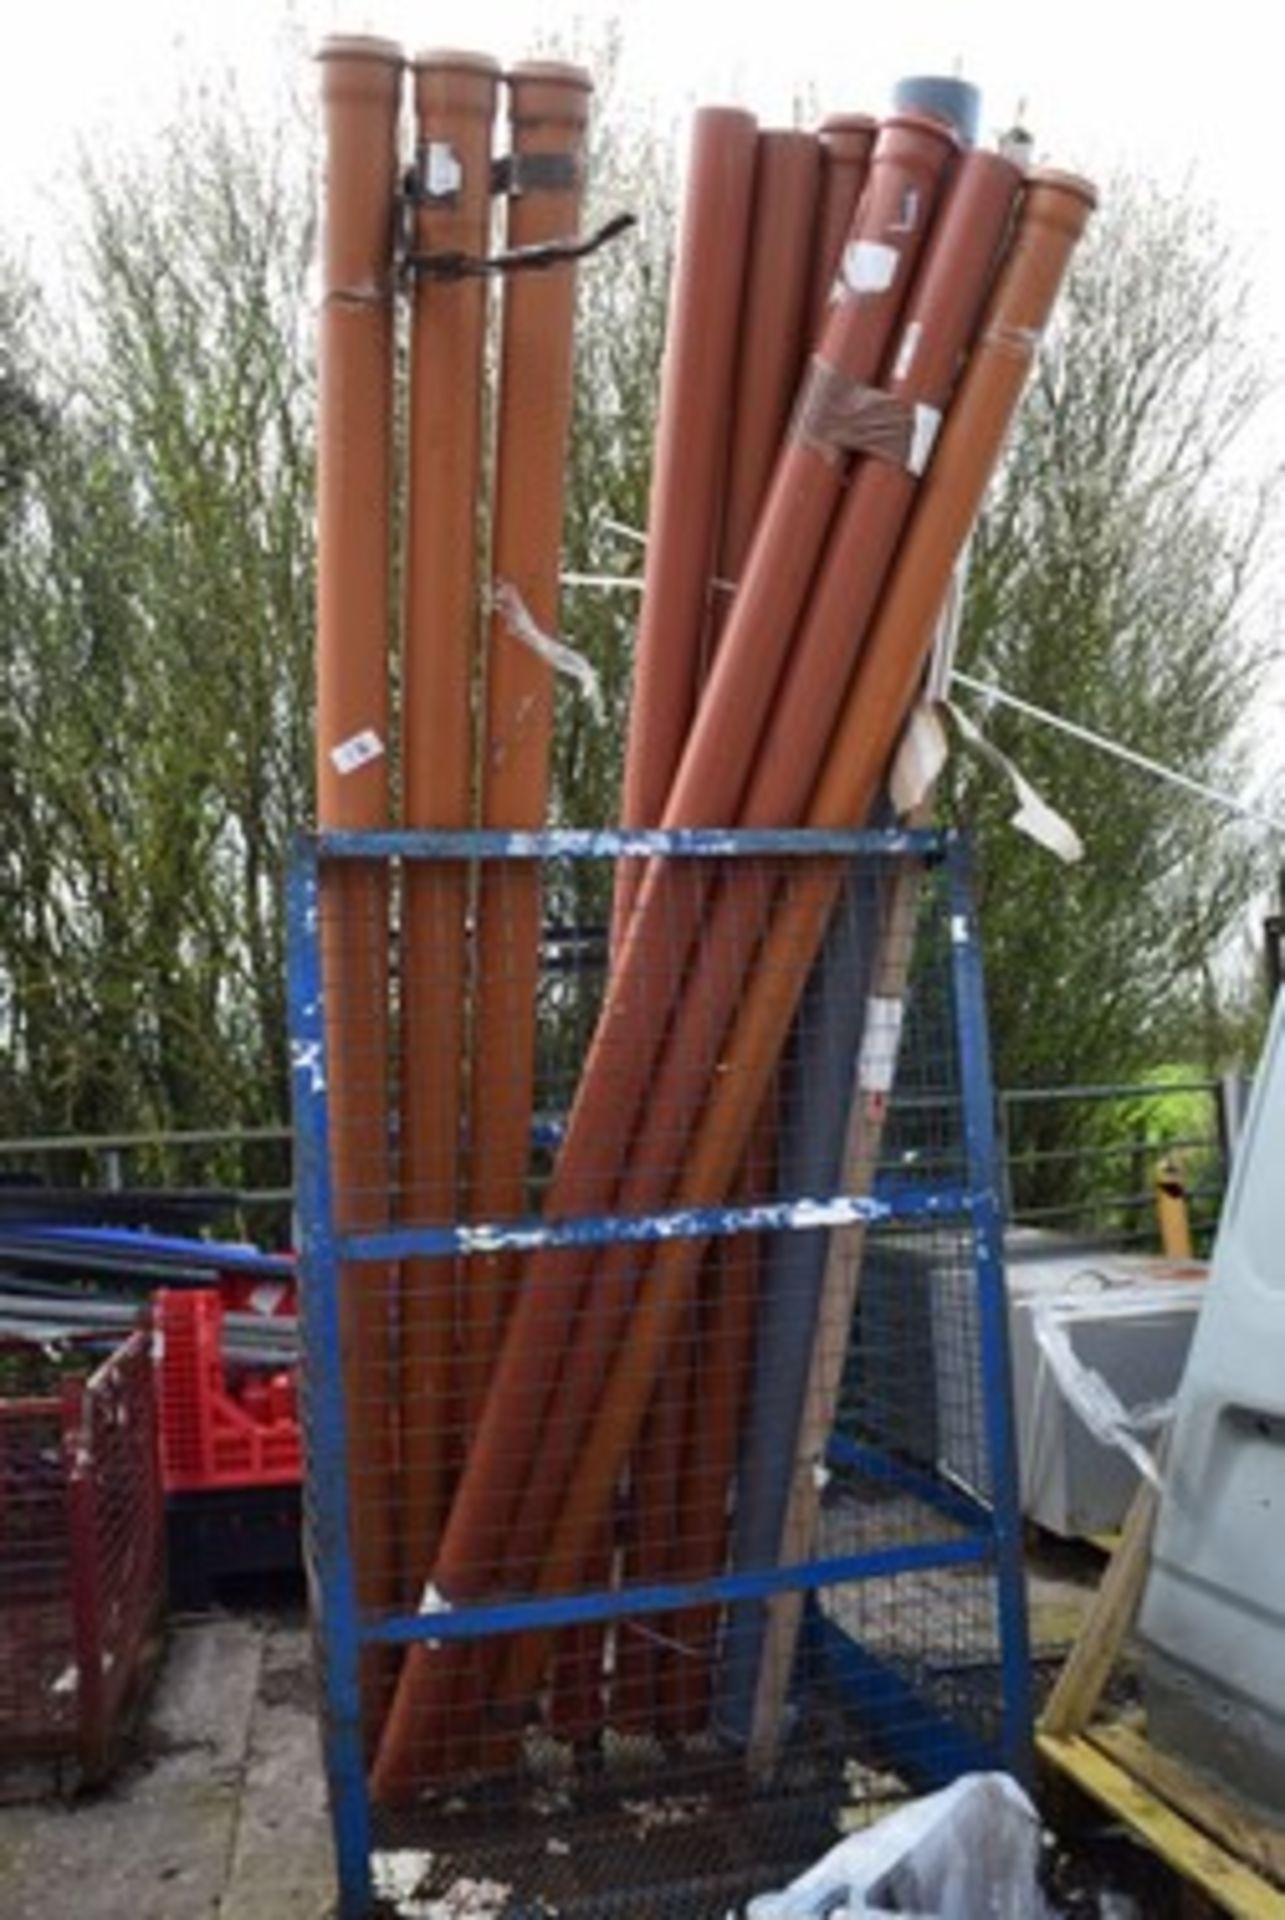 7 x approximately 3m long underground pipes, together with 2 x approximate 3m long slotted